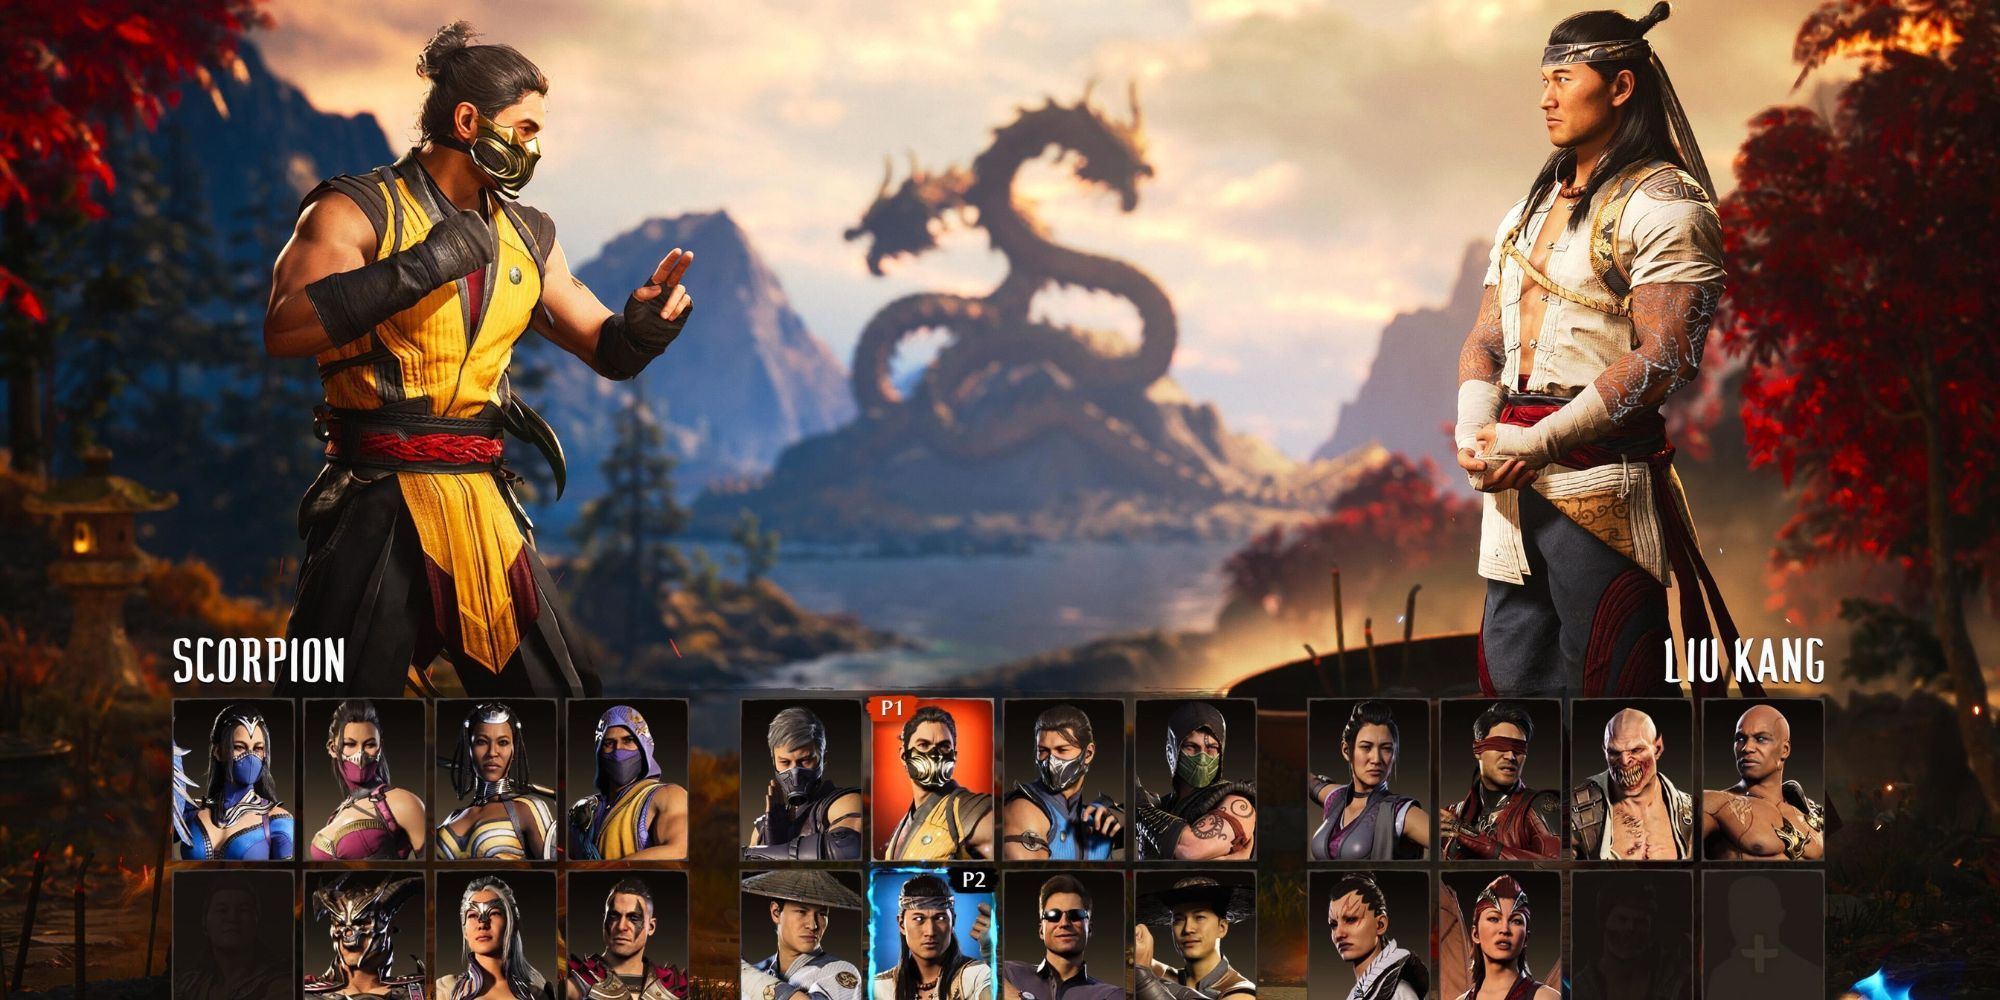 No, There Isn't A 24th Secret Character In Mortal Kombat 1